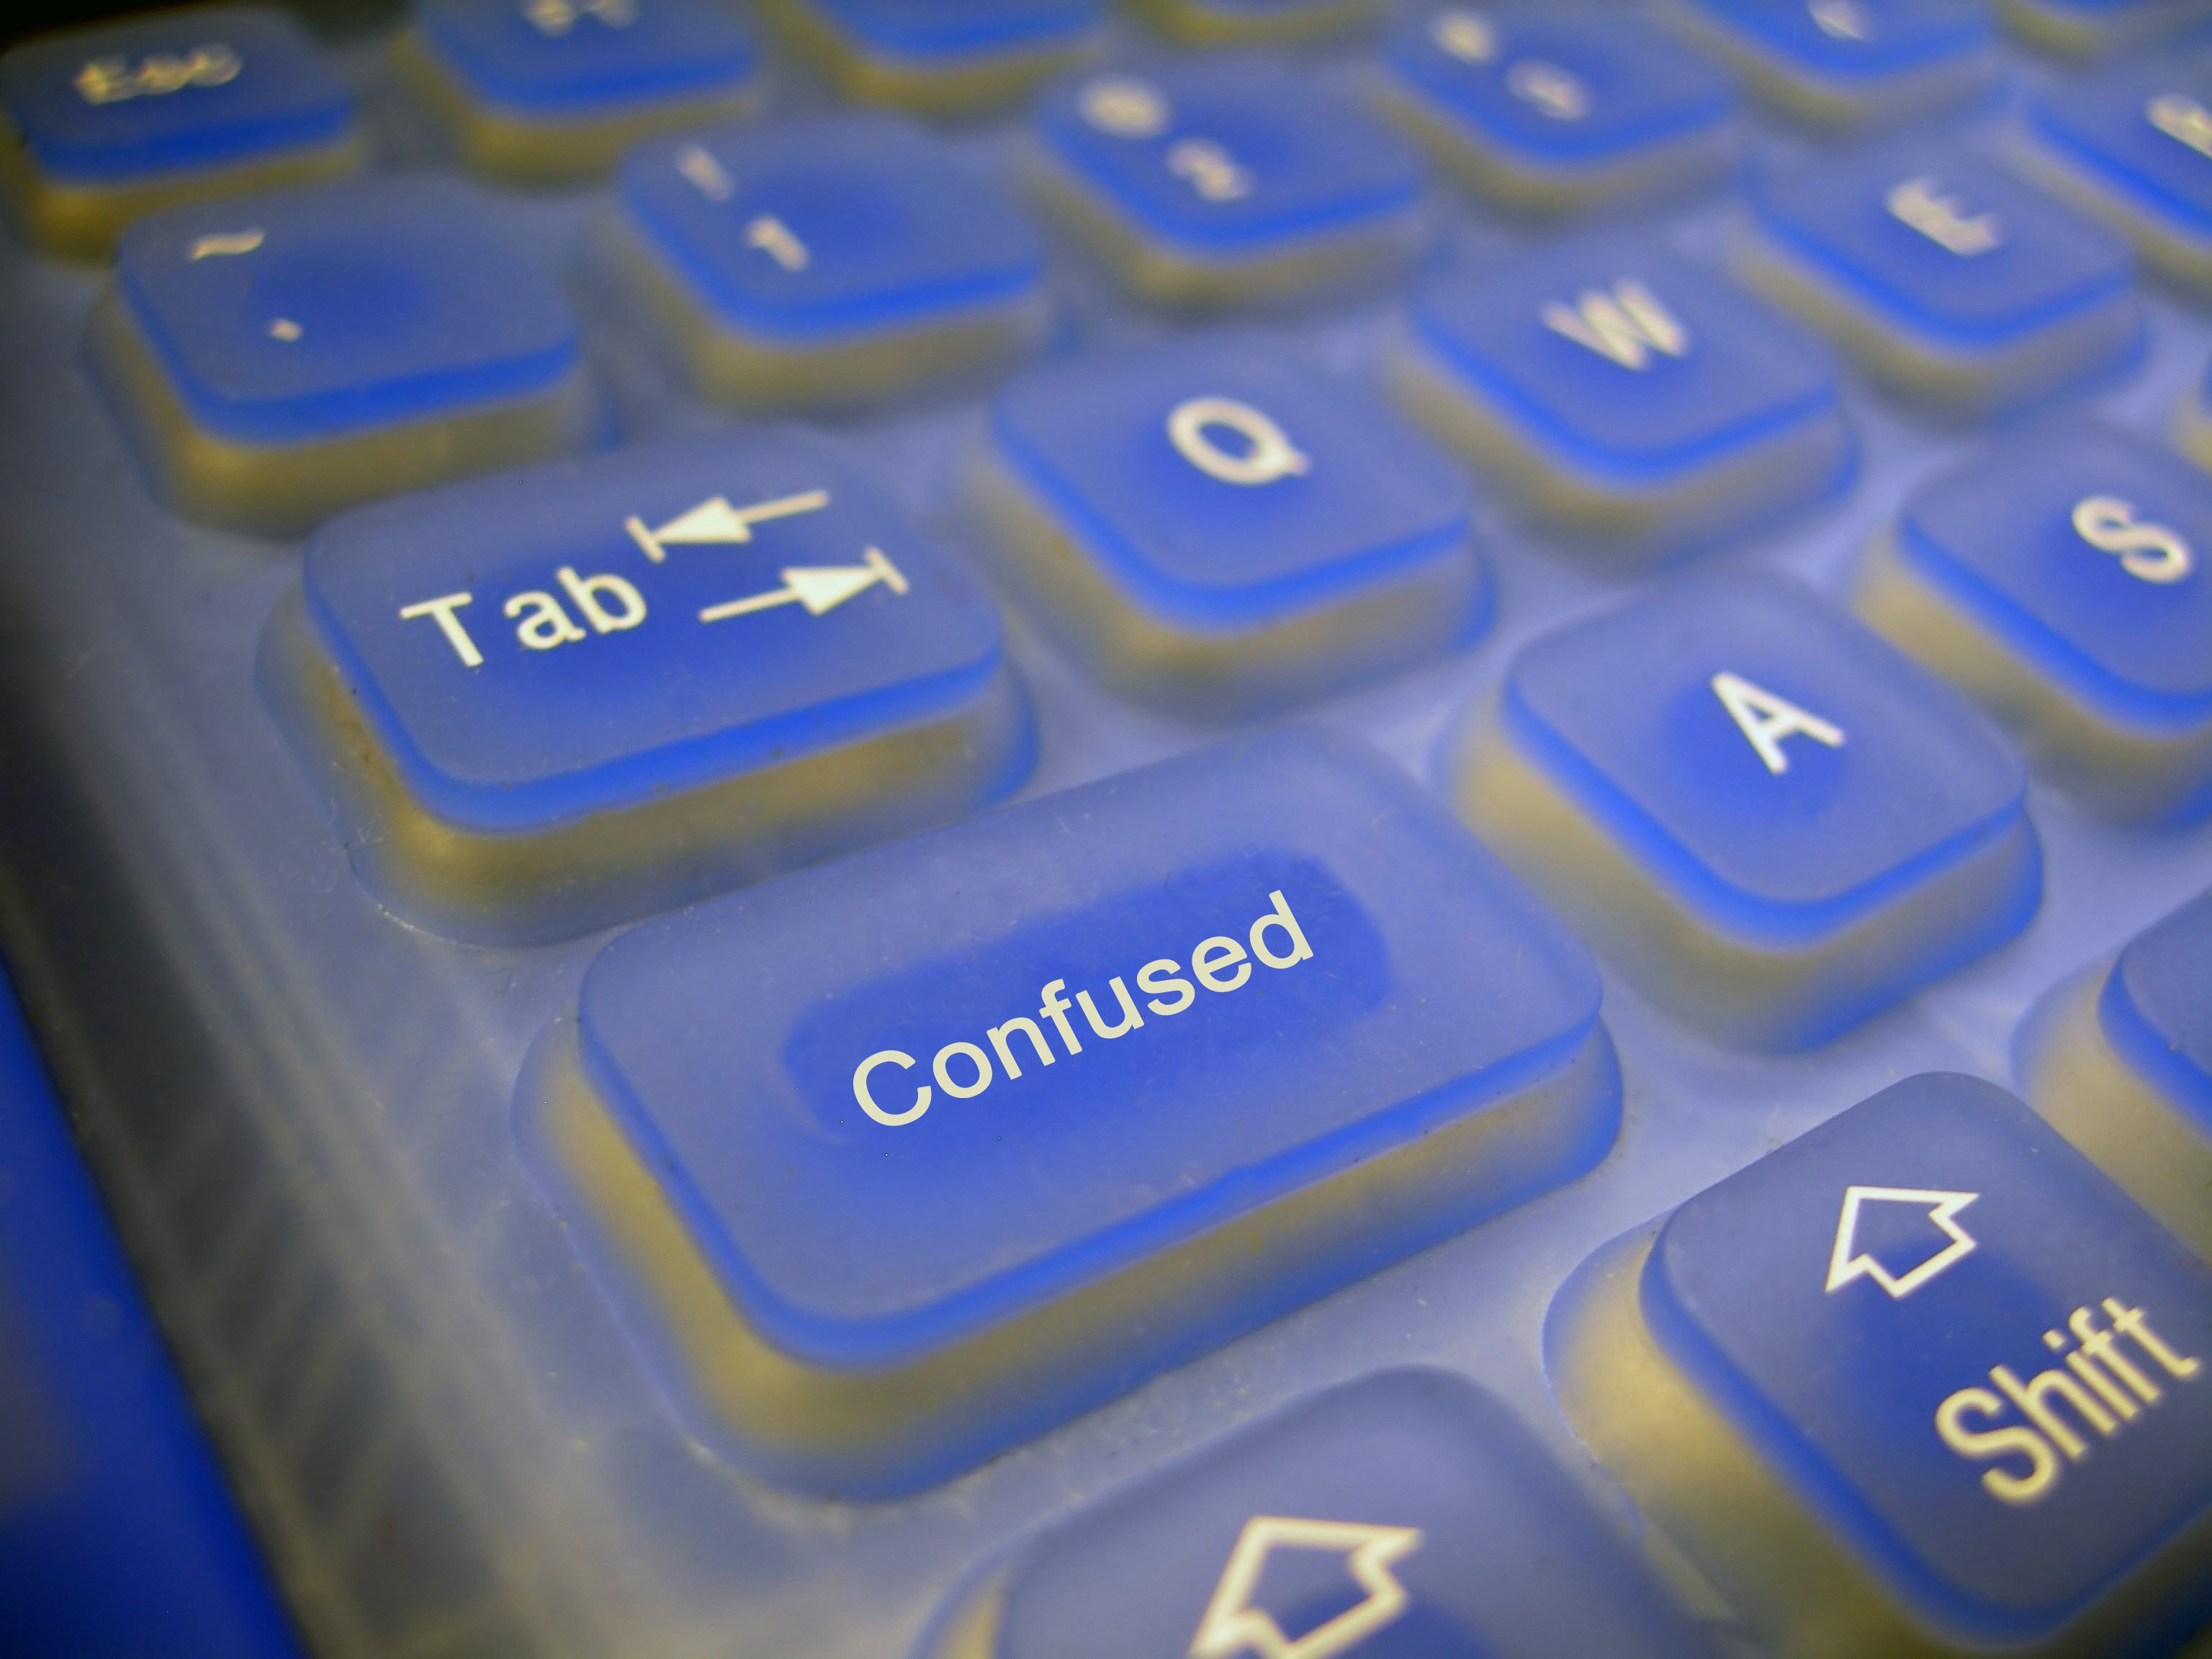 Computer keyboard with the key under the "tab" key labeled as "confused."